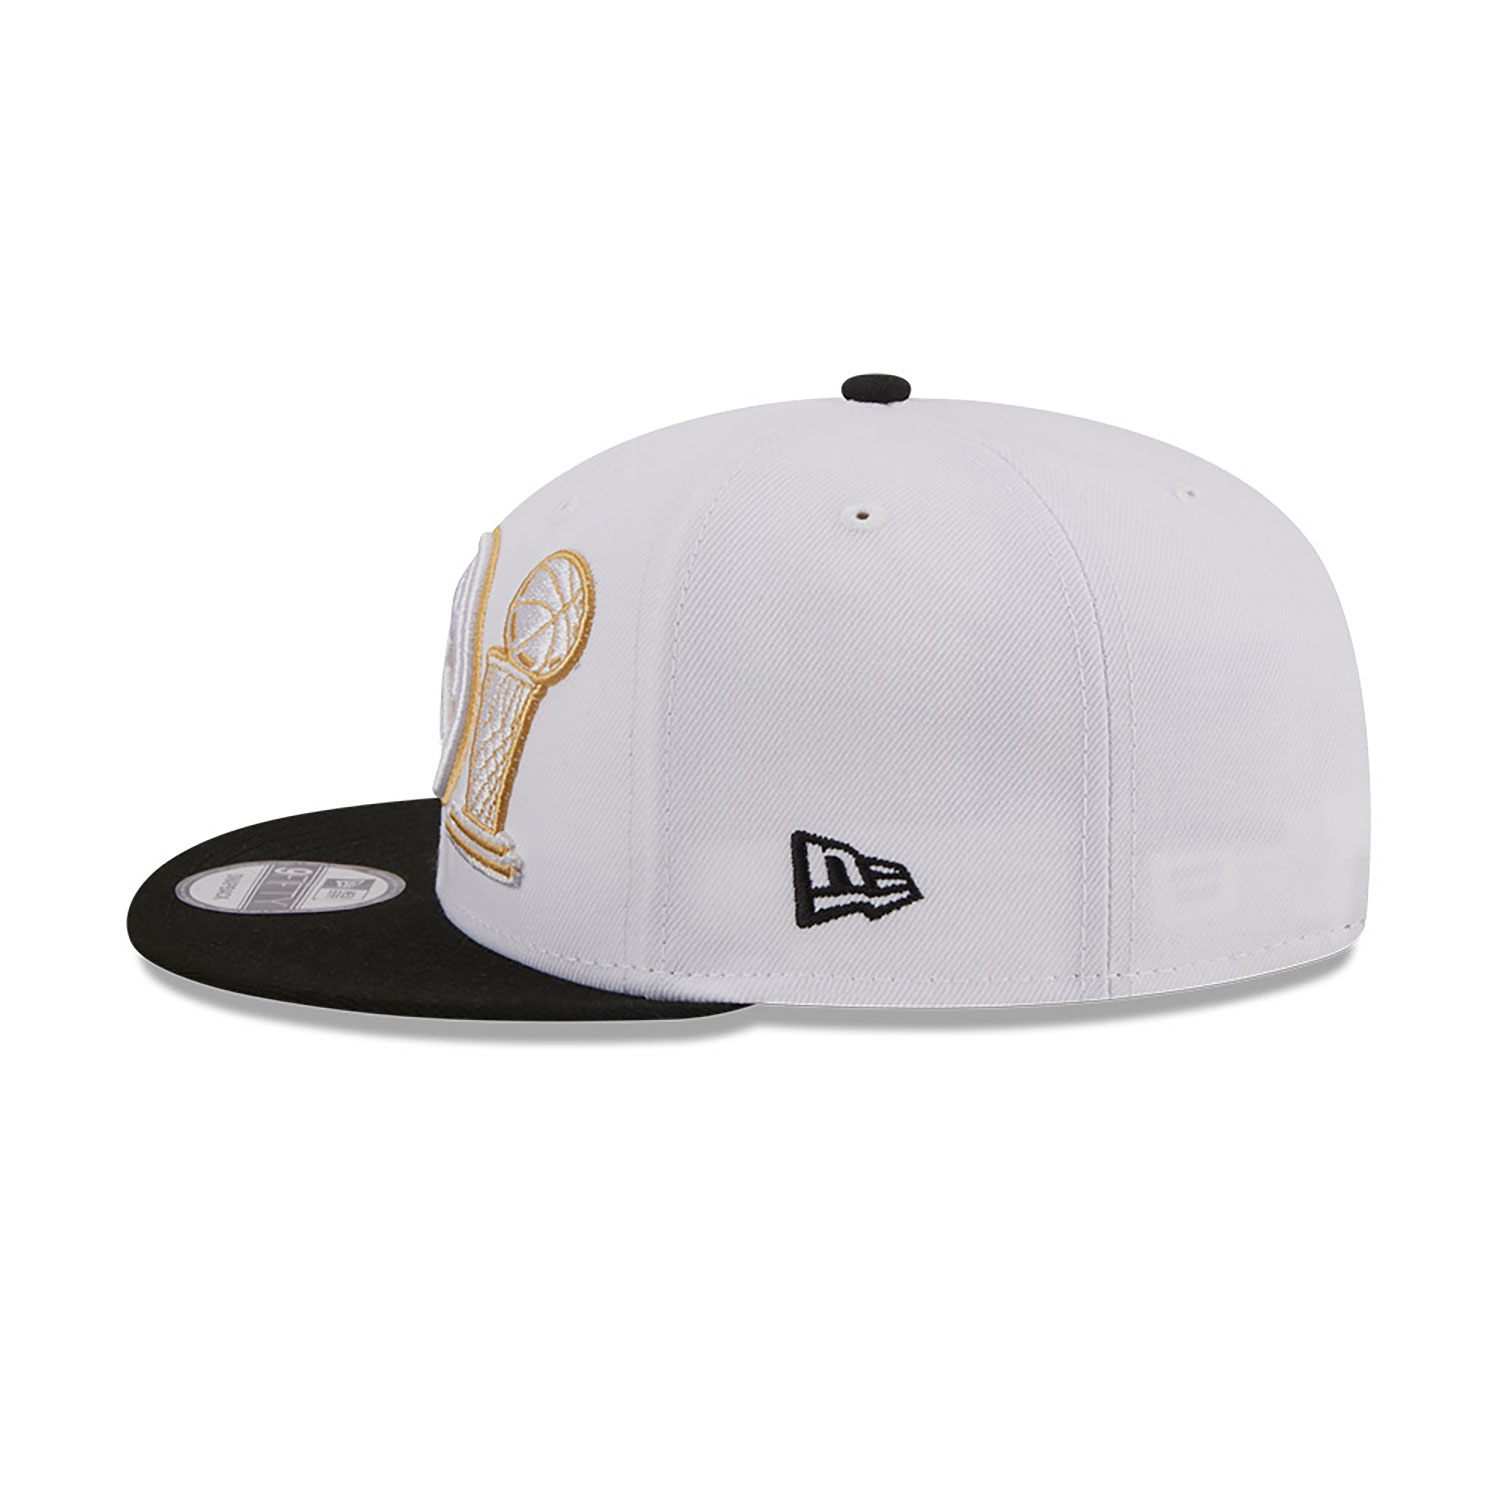 Denver Nuggets NBA Ring Ceremony White 9FIFTY Snapback Cap